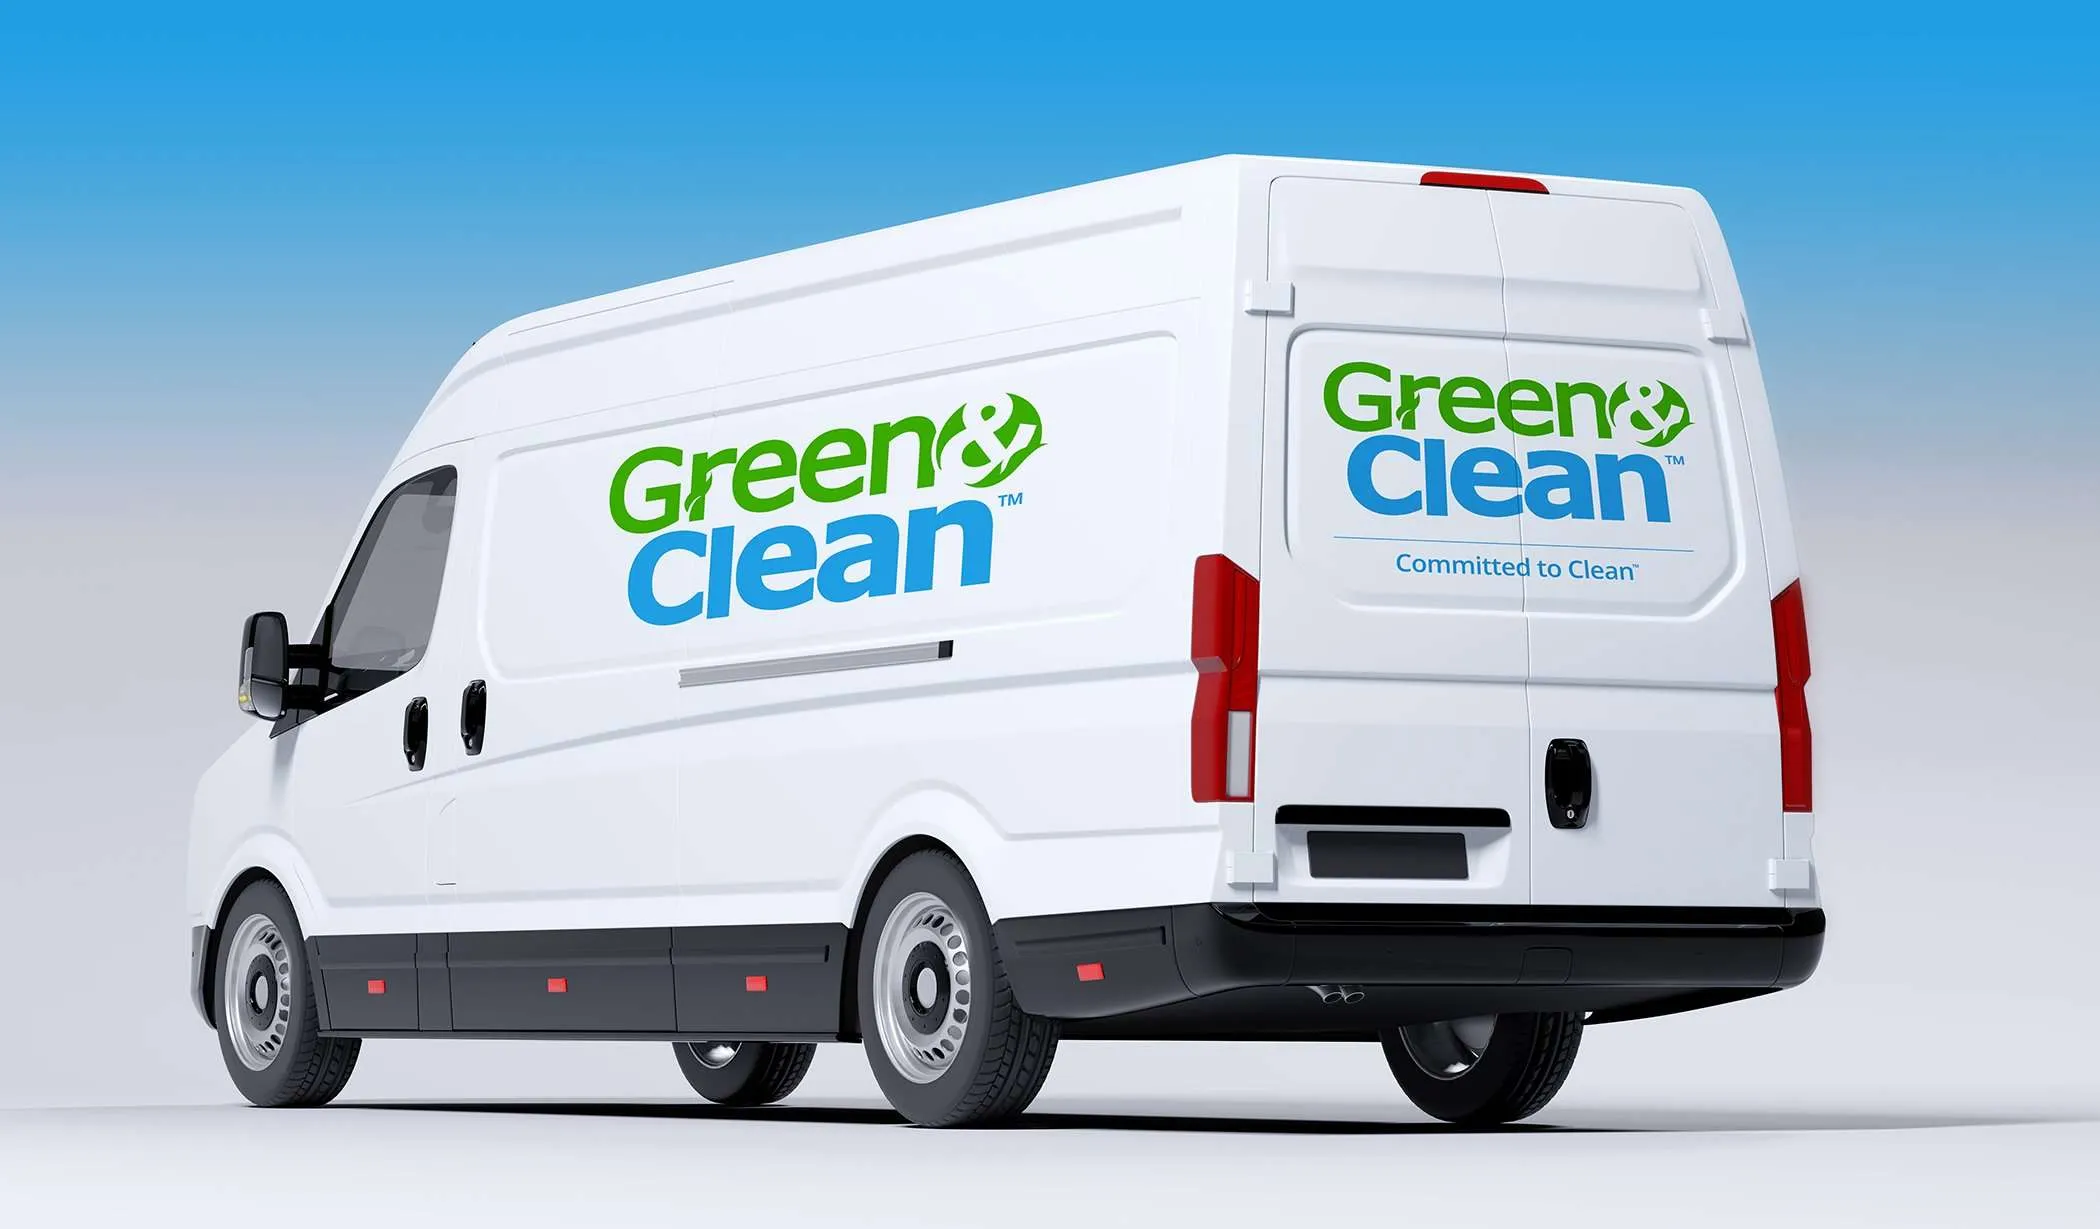 A cleaning van with the Green & Clean logo on the side and back